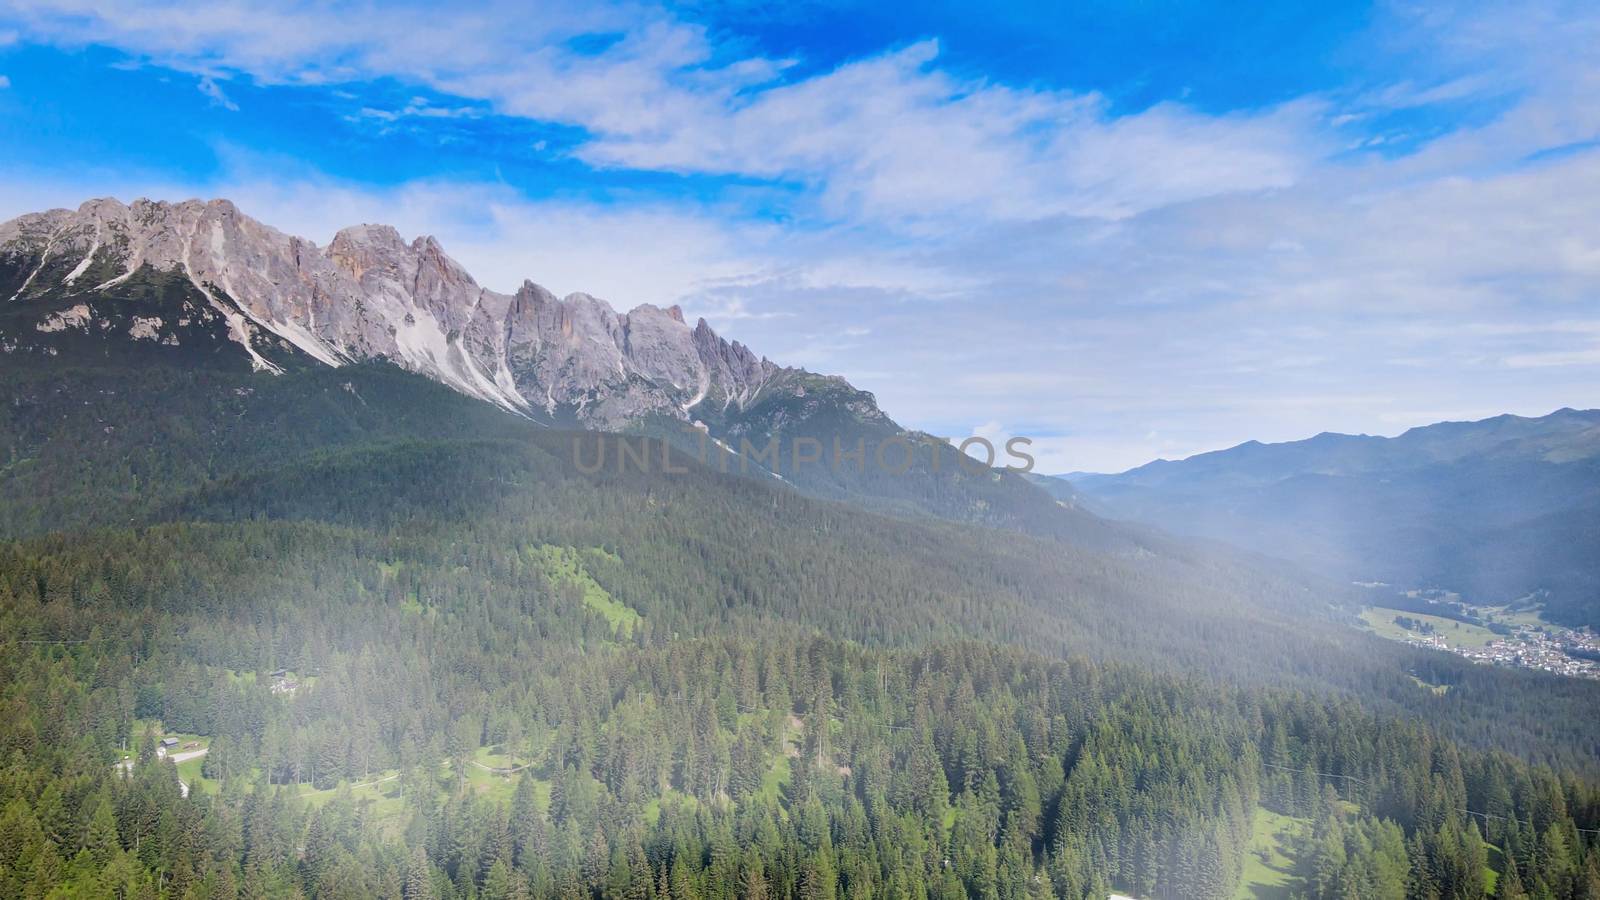 Alpin landscape with beautiful mountains in summertime, view from drone.